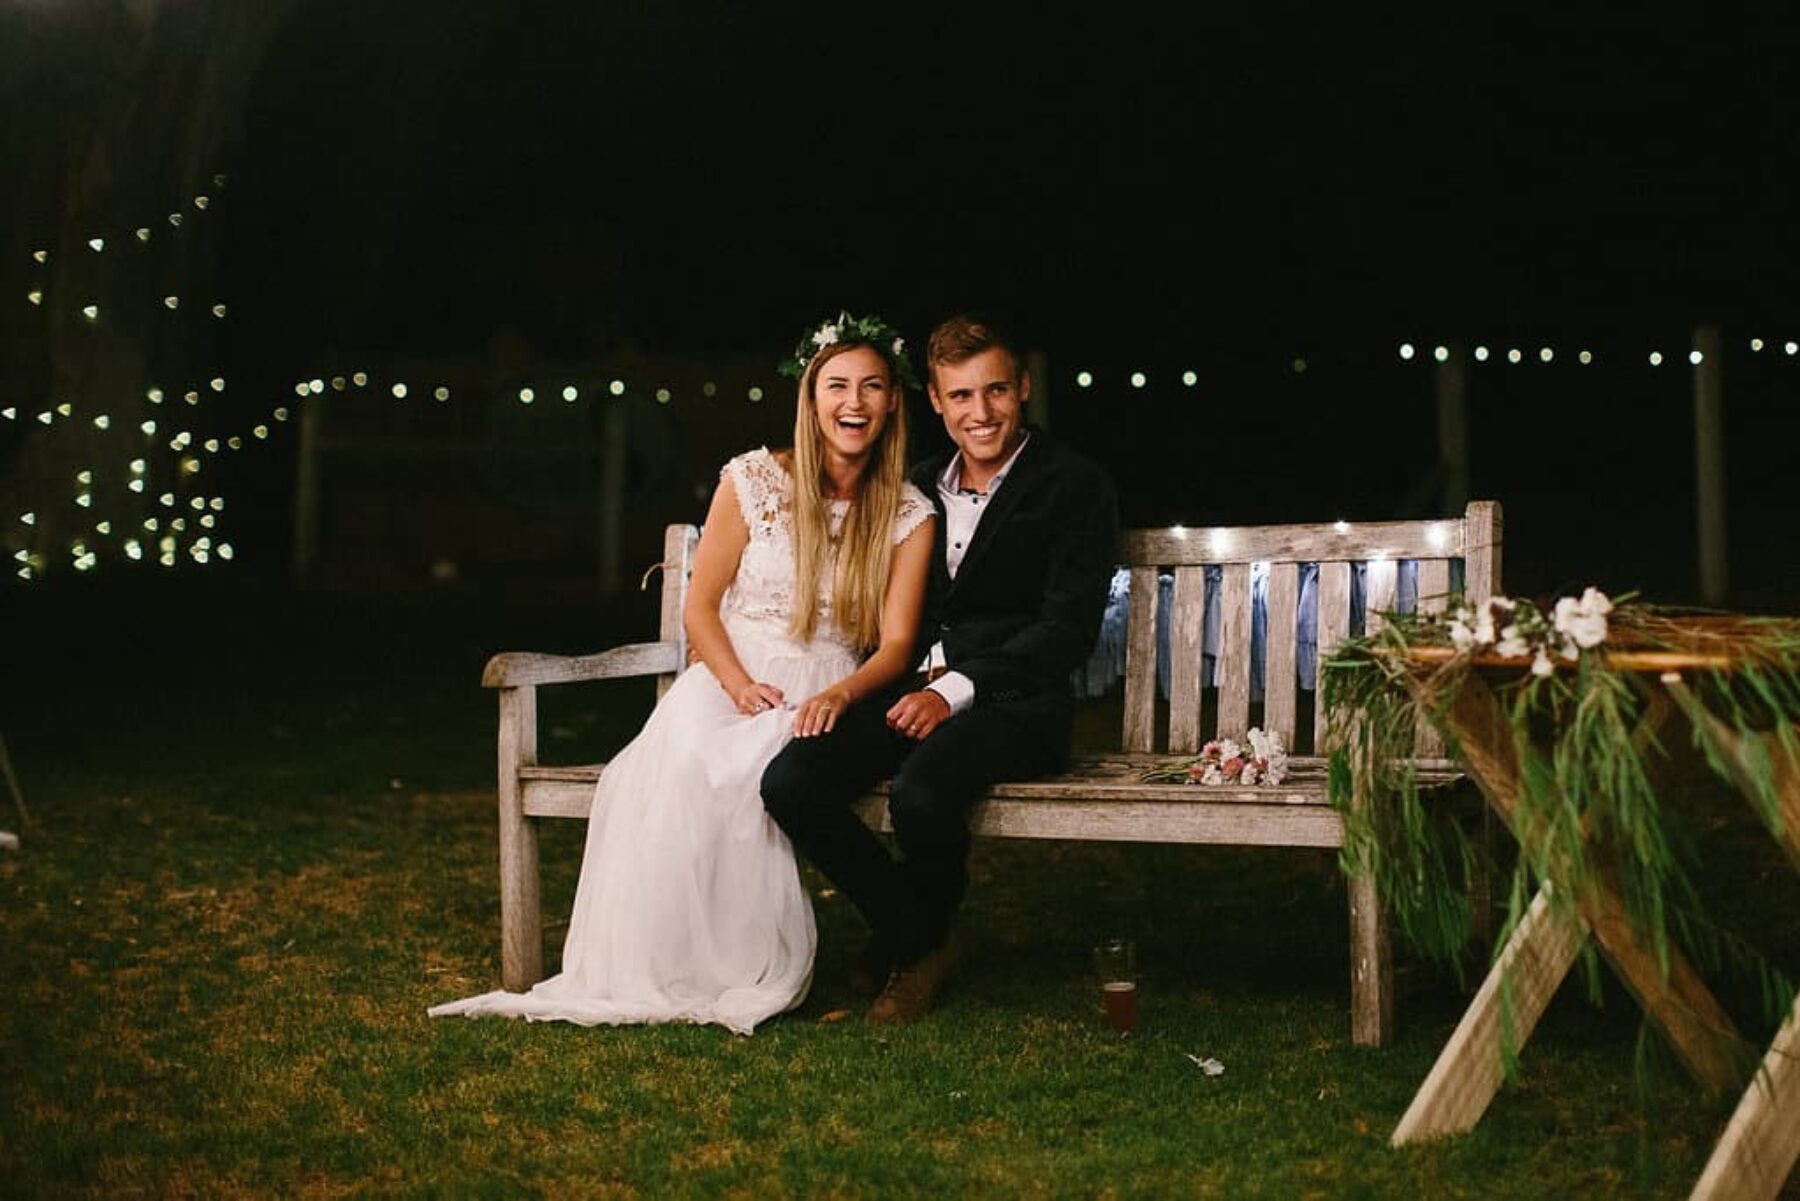 Cape Bouvard Winery wedding - photography by Ryder Evans